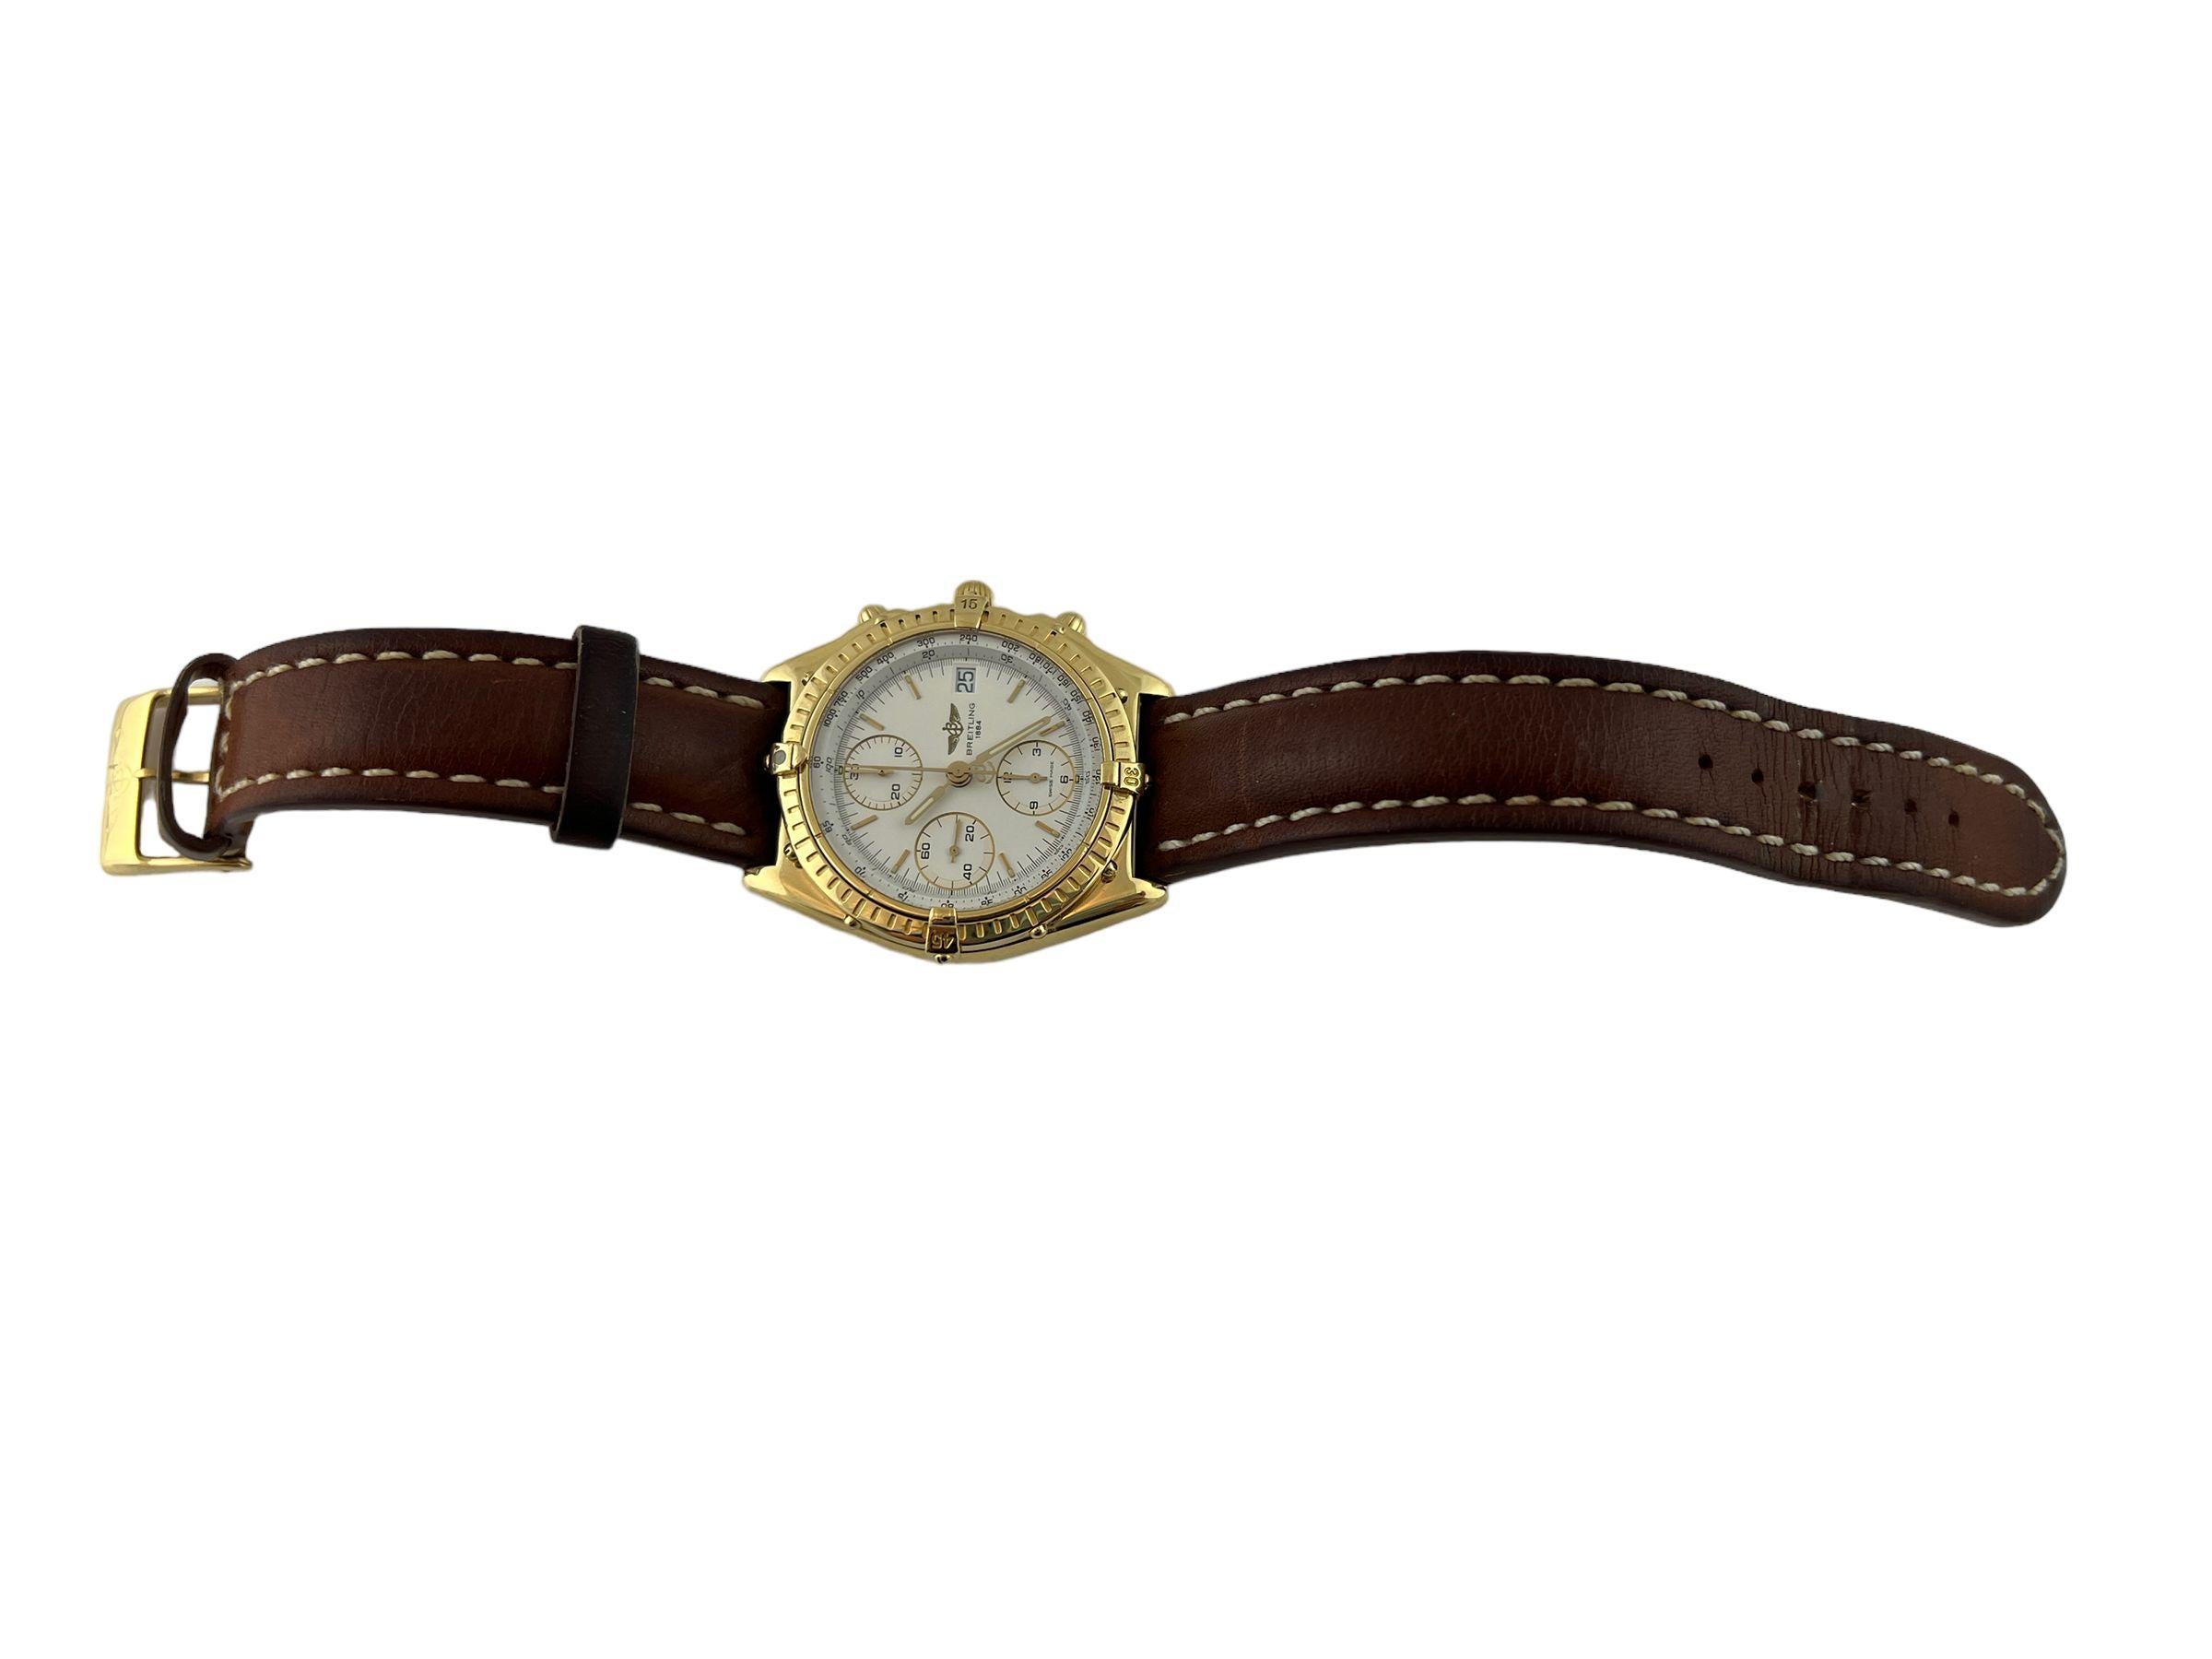 Breitling Chronomat 18k Yellow Gold Men's Watch Leather Band K13047X For Sale 3